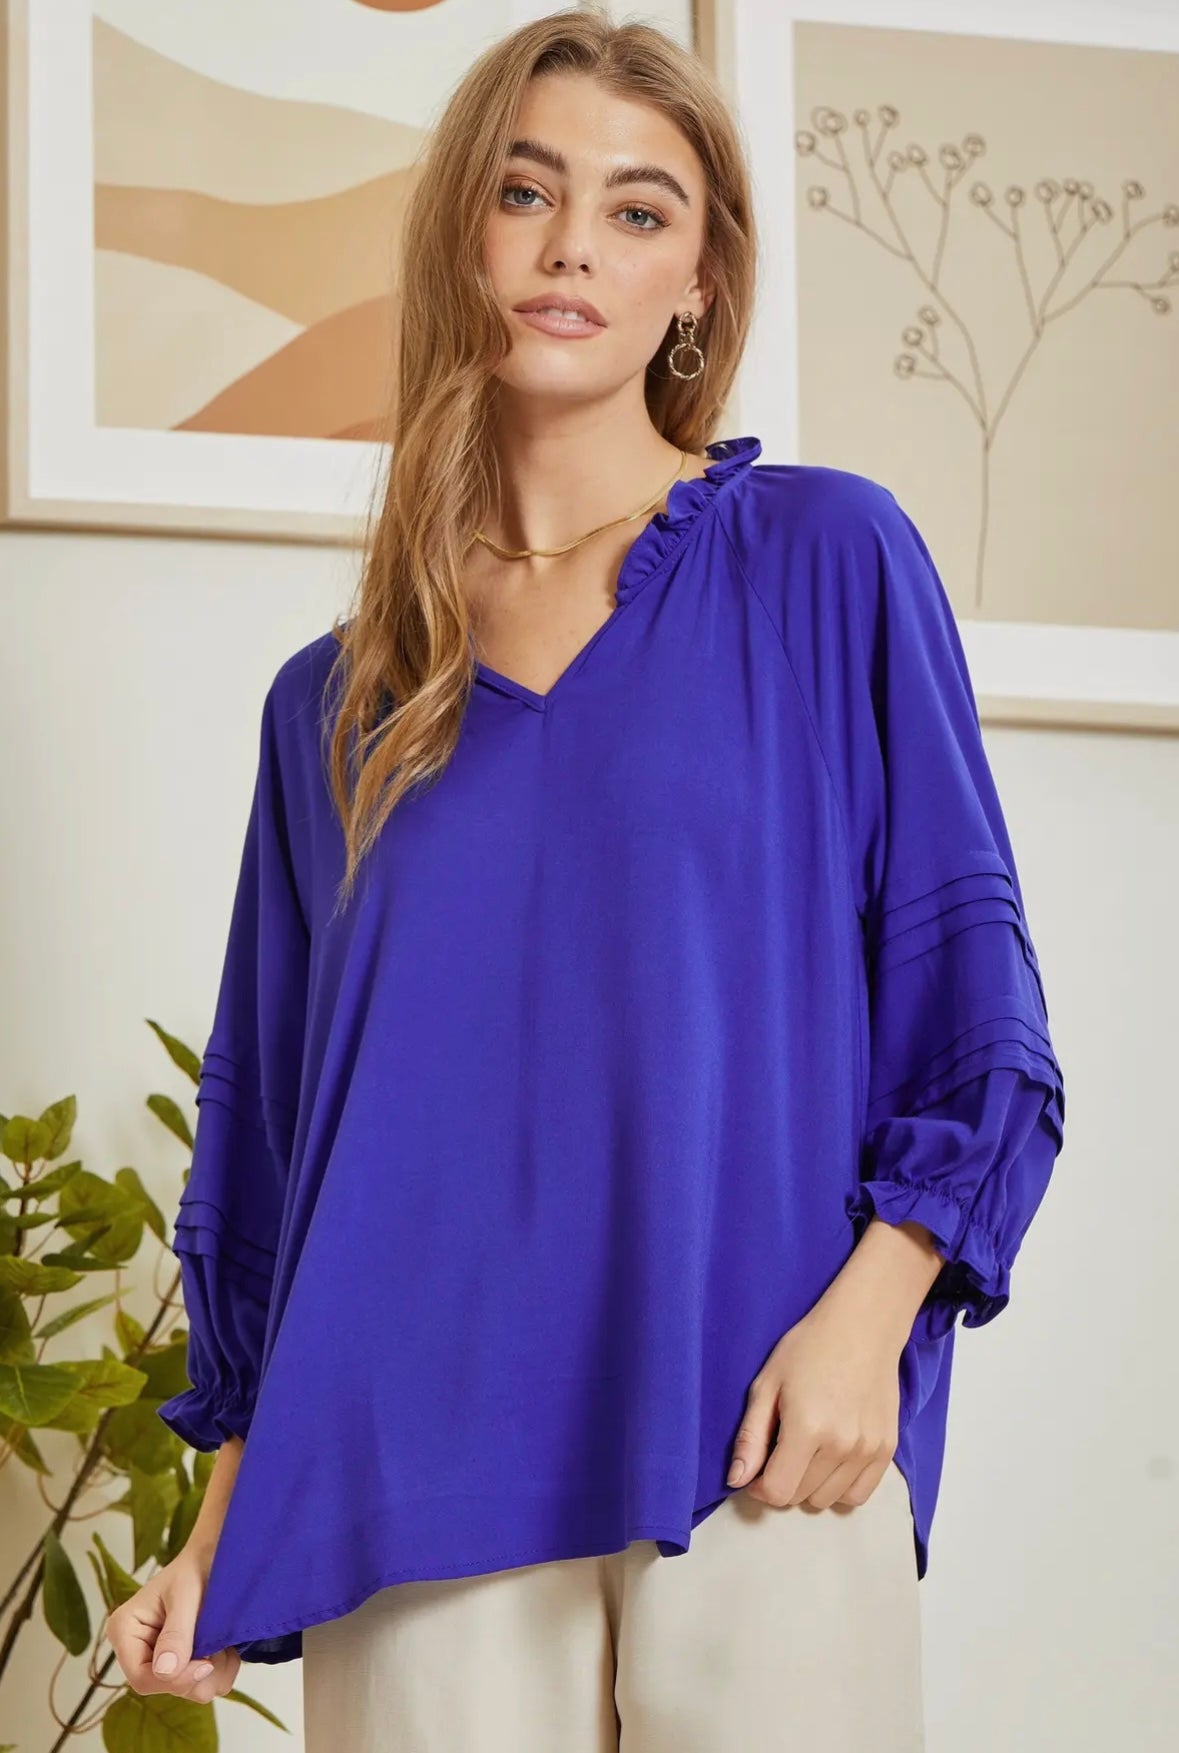 Royal blue top with ruffle neck detail